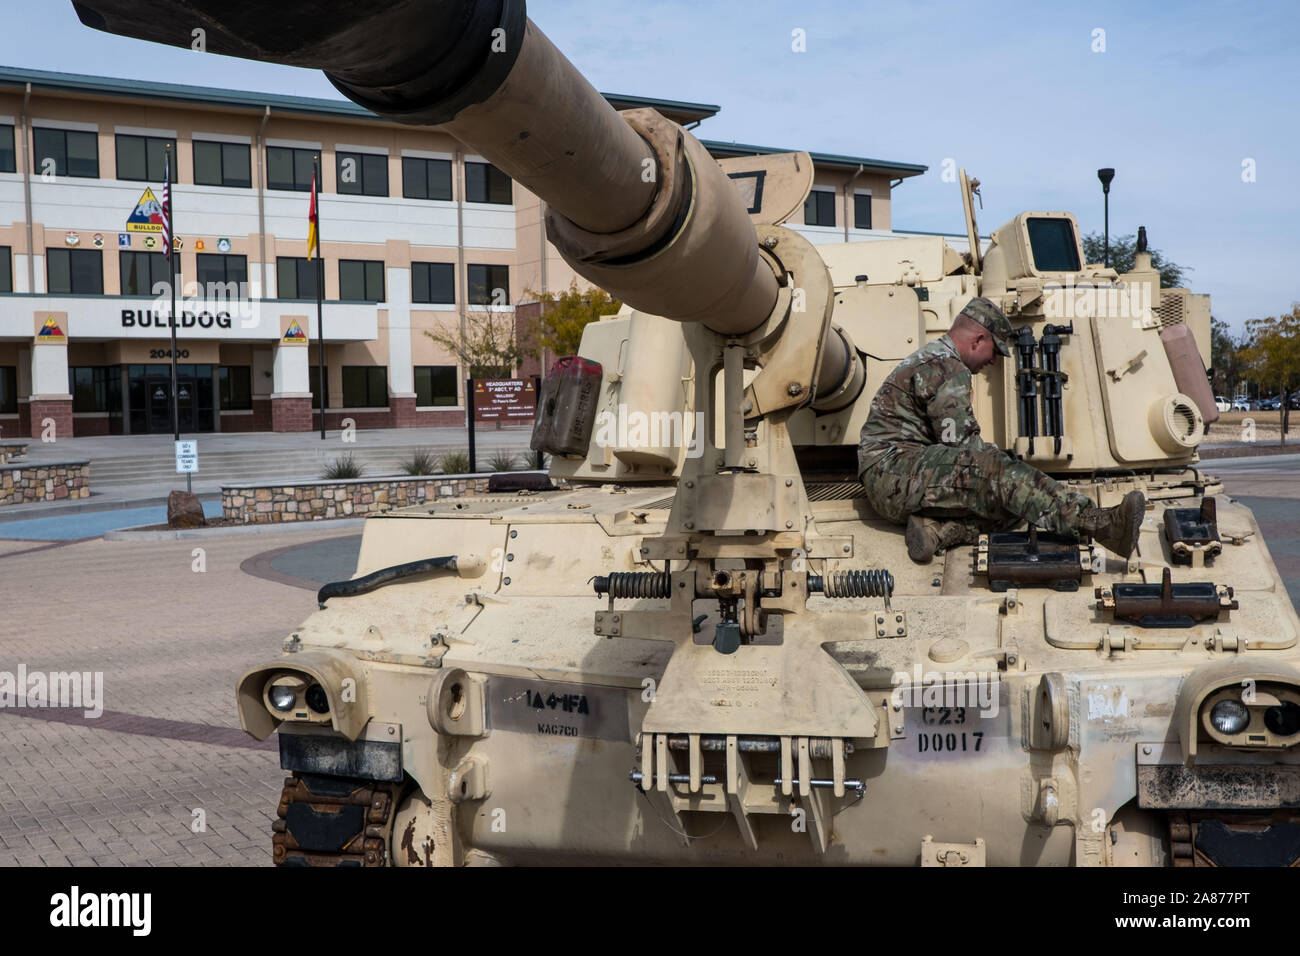 El Paso, Texas, USA. 6th Nov, 2019. SPC. CORY RITCH of the 3rd Armored Brigade Combat Team, 1st Armored Division, sits on a tank on display during the celebration of Torch Week at Fort Bliss in El Paso, Texas. The celebration commemorates the United States' invasion of North Africa during Operation Torch on November 8 through November 16, 1942 during World War II. Credit: Joel Angel Juarez/ZUMA Wire/Alamy Live News Stock Photo